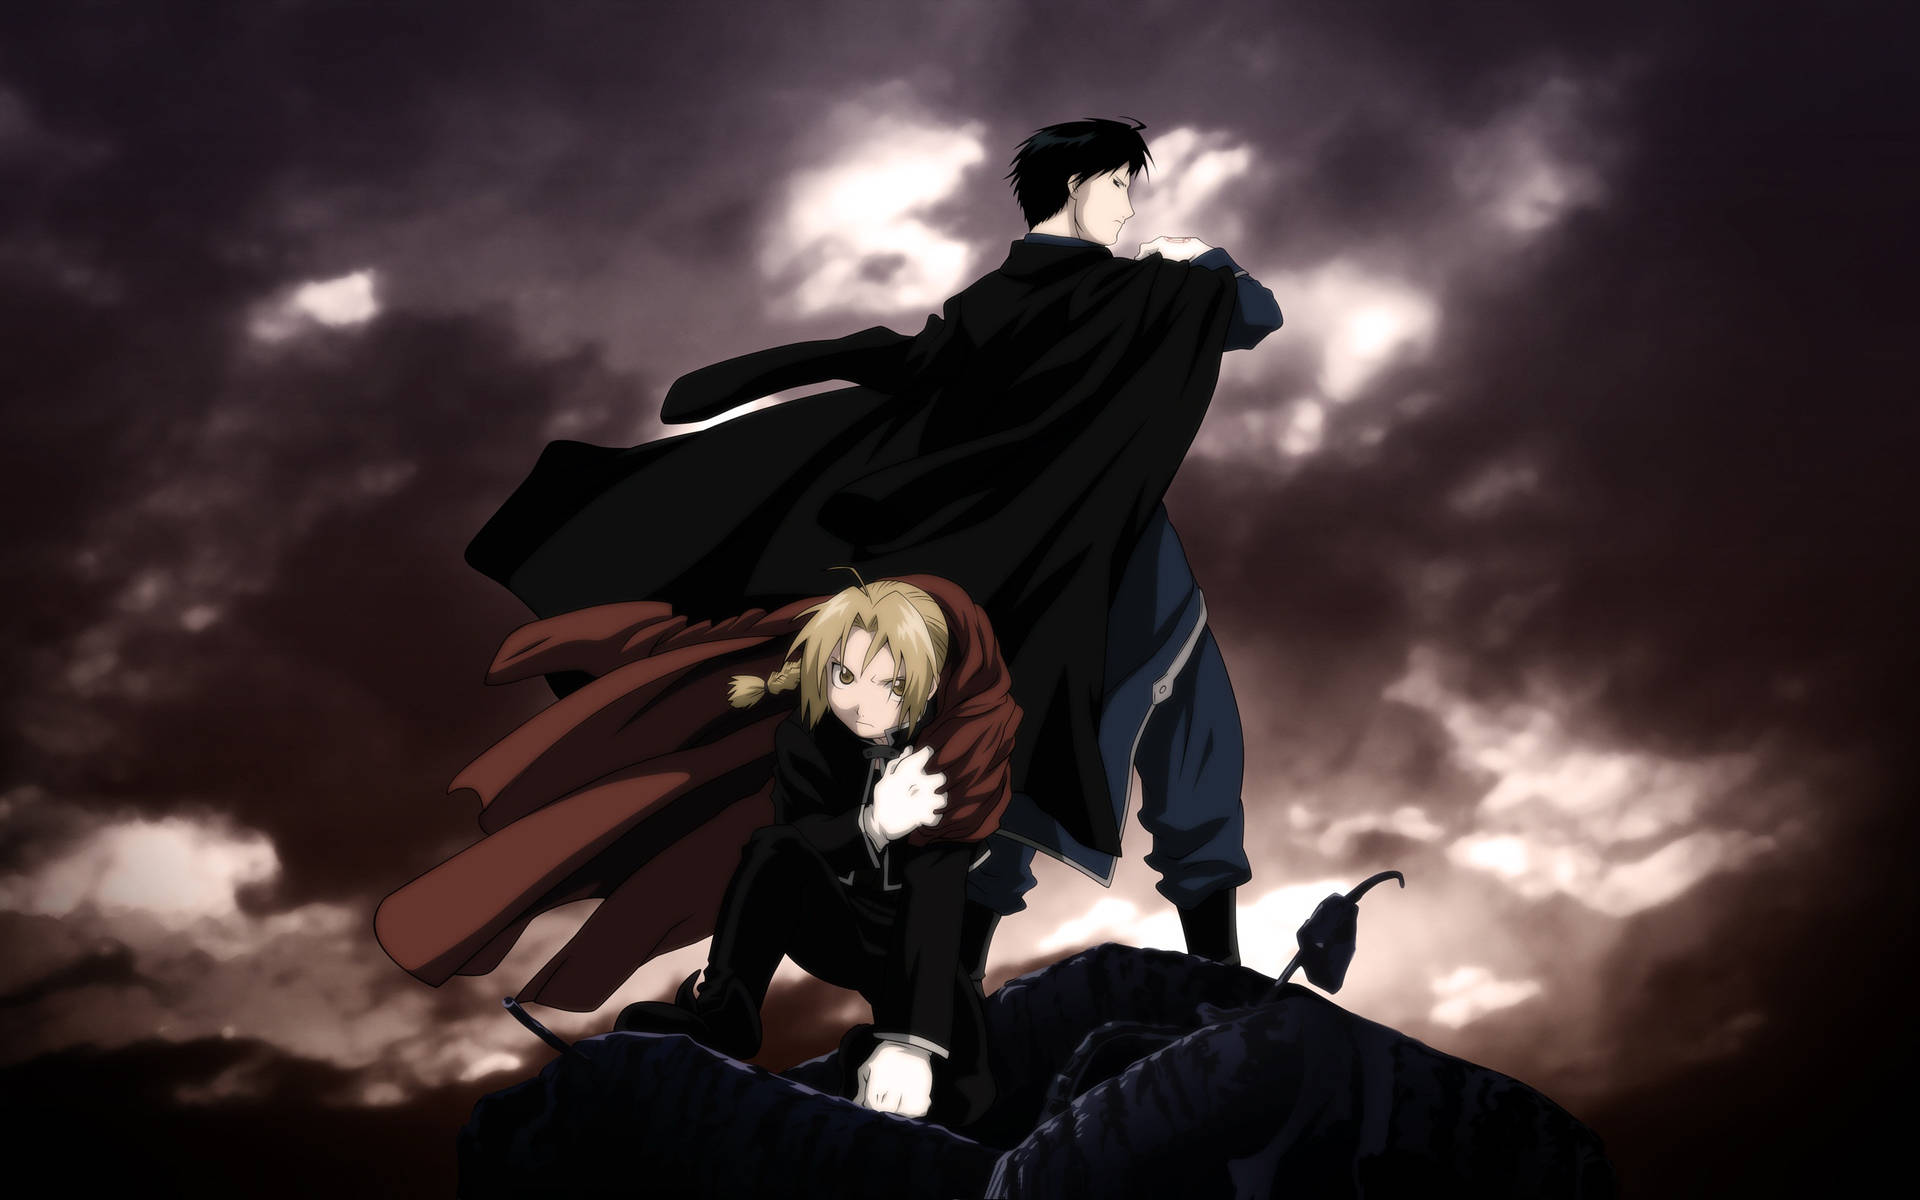 “Achieving perfection by understanding the laws of the universe” -Edward Elric Wallpaper